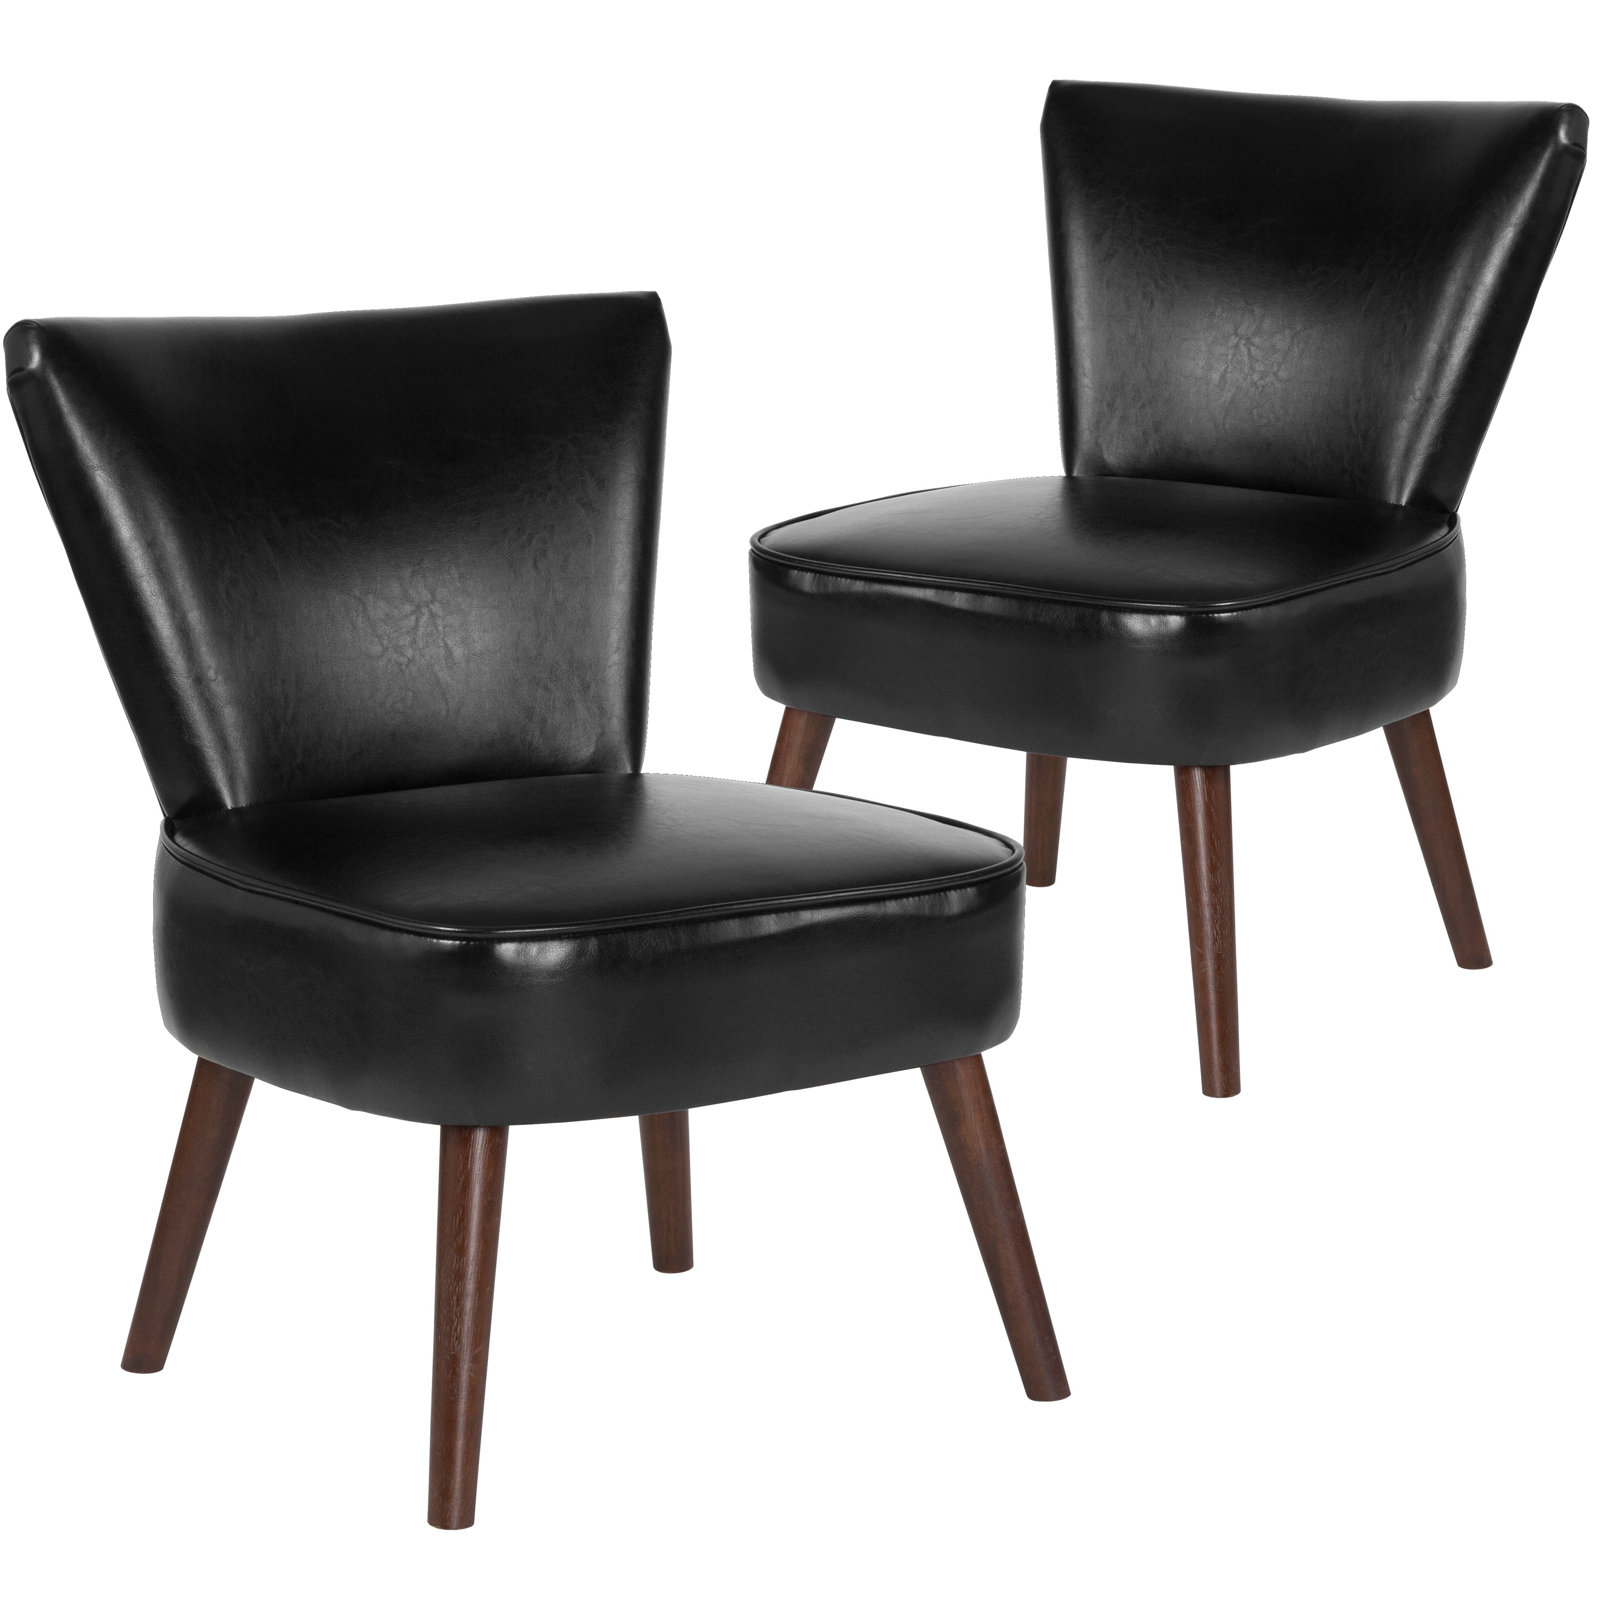 Corrigan Studio Caine LeatherSoft Retro Side Chair with Wood Legs & Reviews